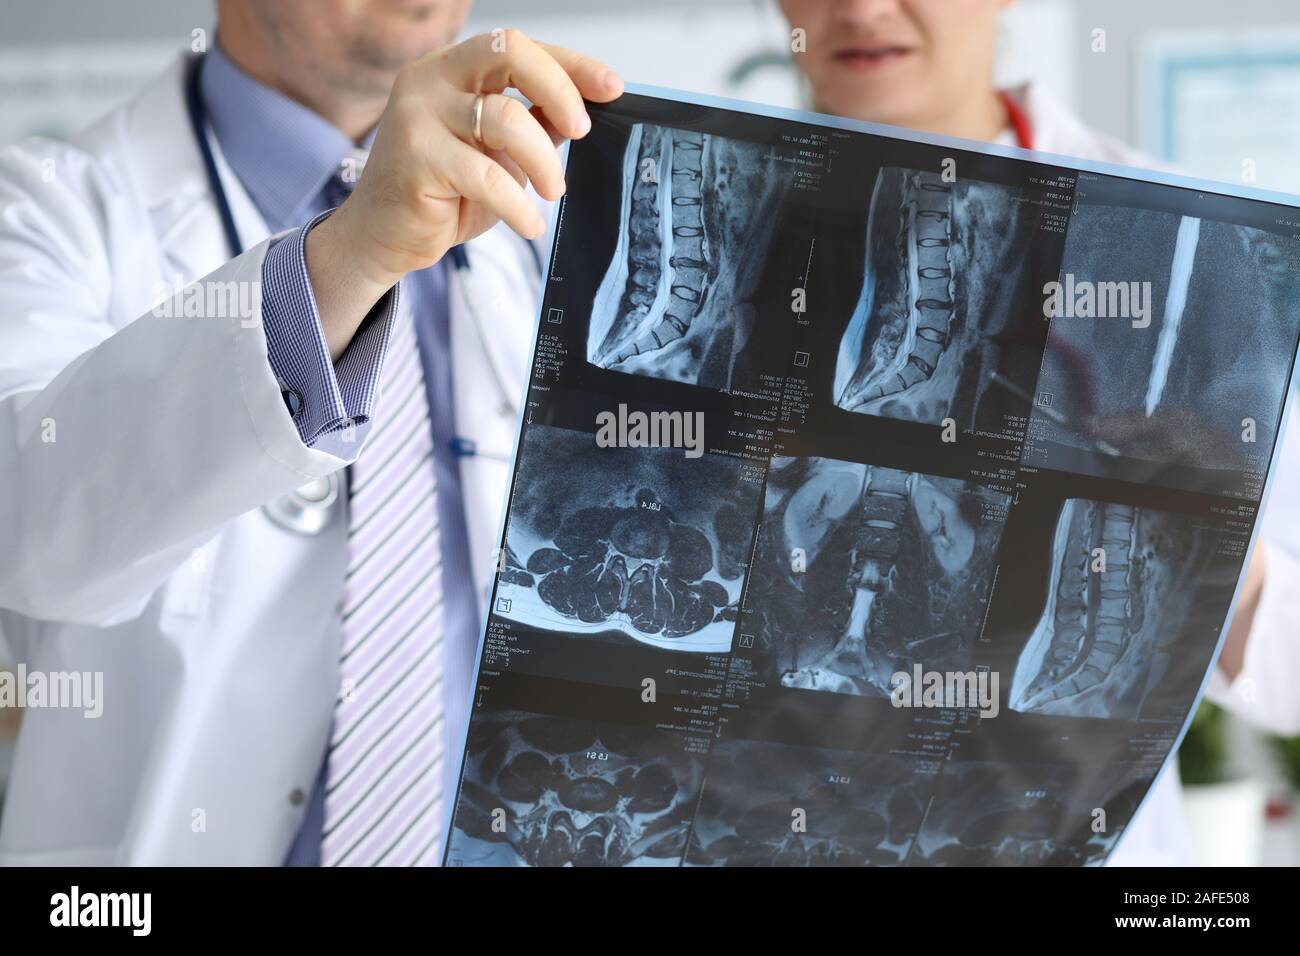 Doctor with co-worker speaking about radiogram Stock Photo